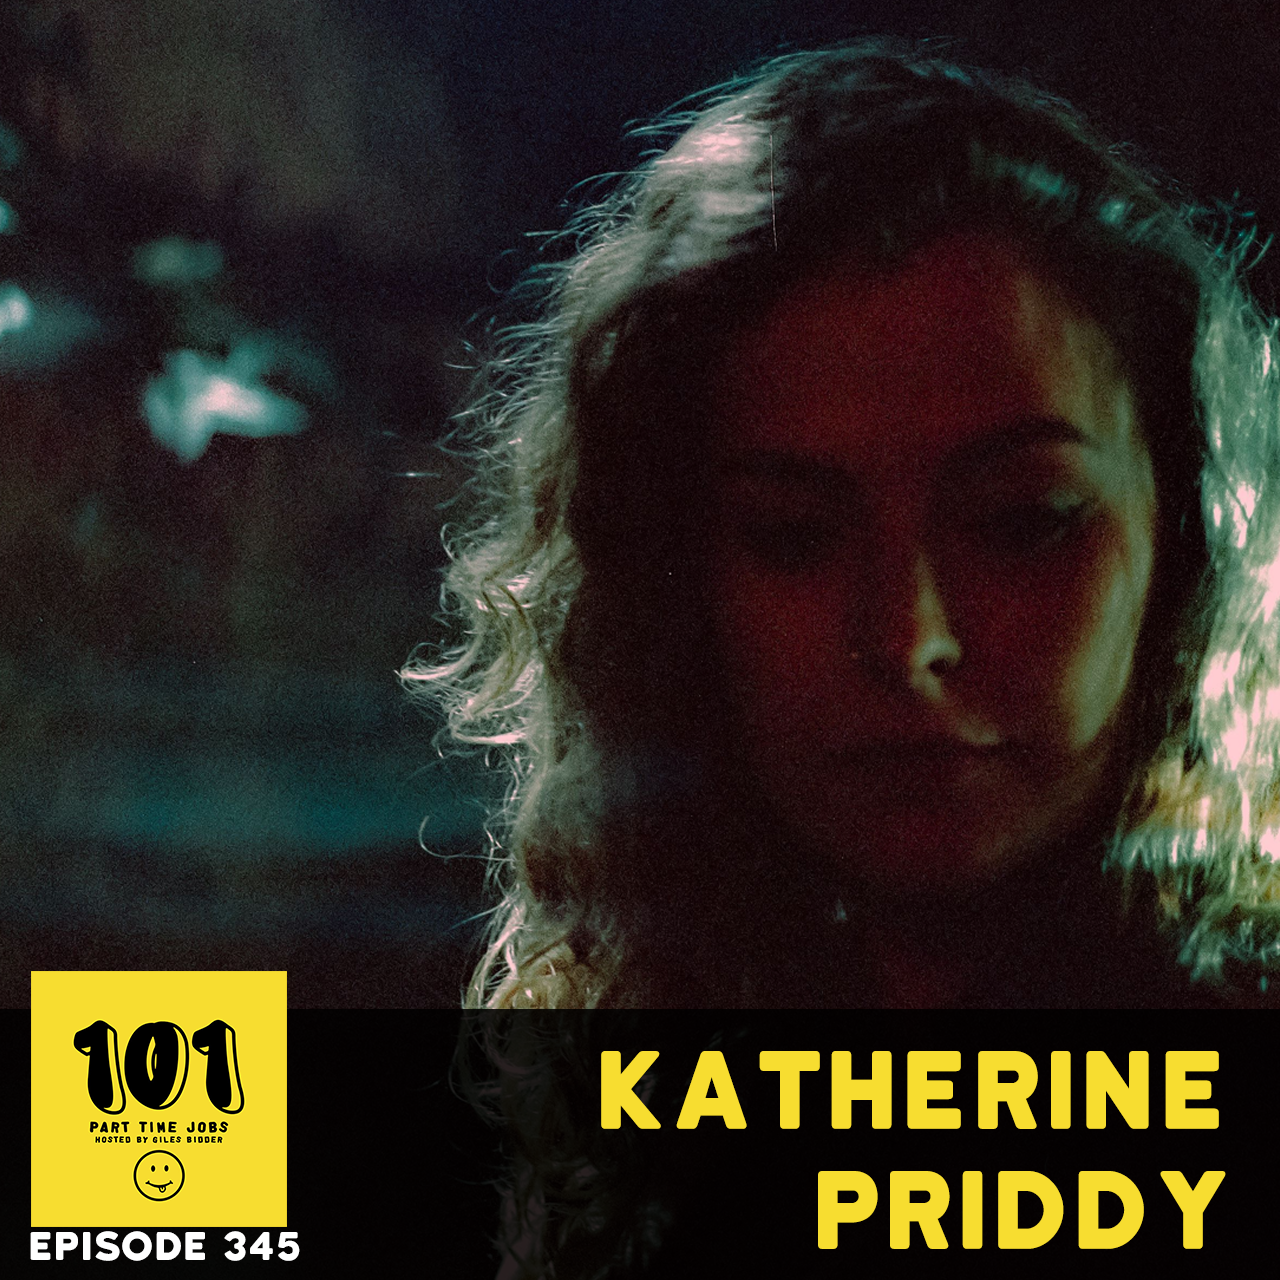 Episode Katherine Priddy - "My first gig outside of my village was at the O2"